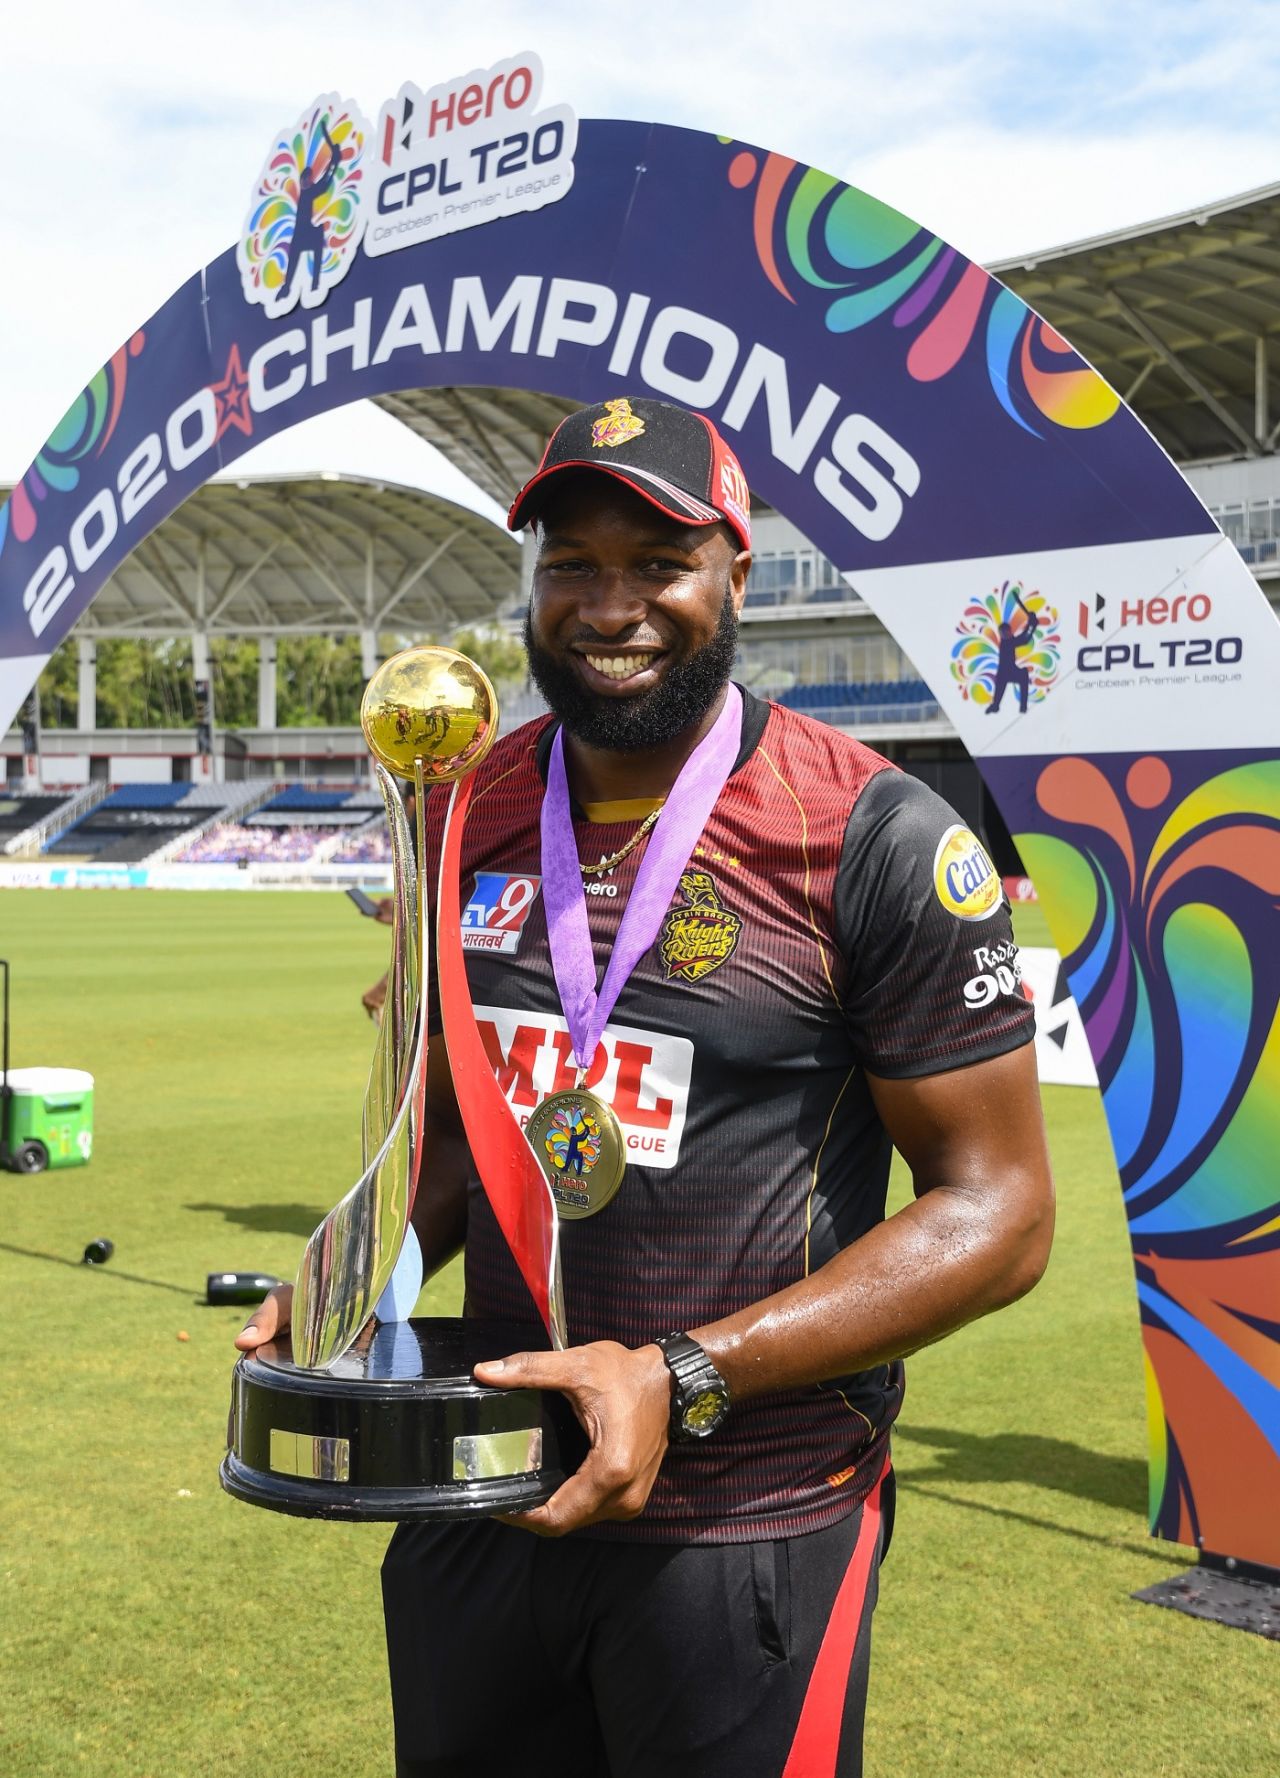 Kieron Pollard with the CPL 2020 trophy after leading Trinbago Knight Riders to 12 wins in 12 matches, St Lucia Zouks v Trinbago Knight Riders, CPL final, Tarouba, September 10, 2020